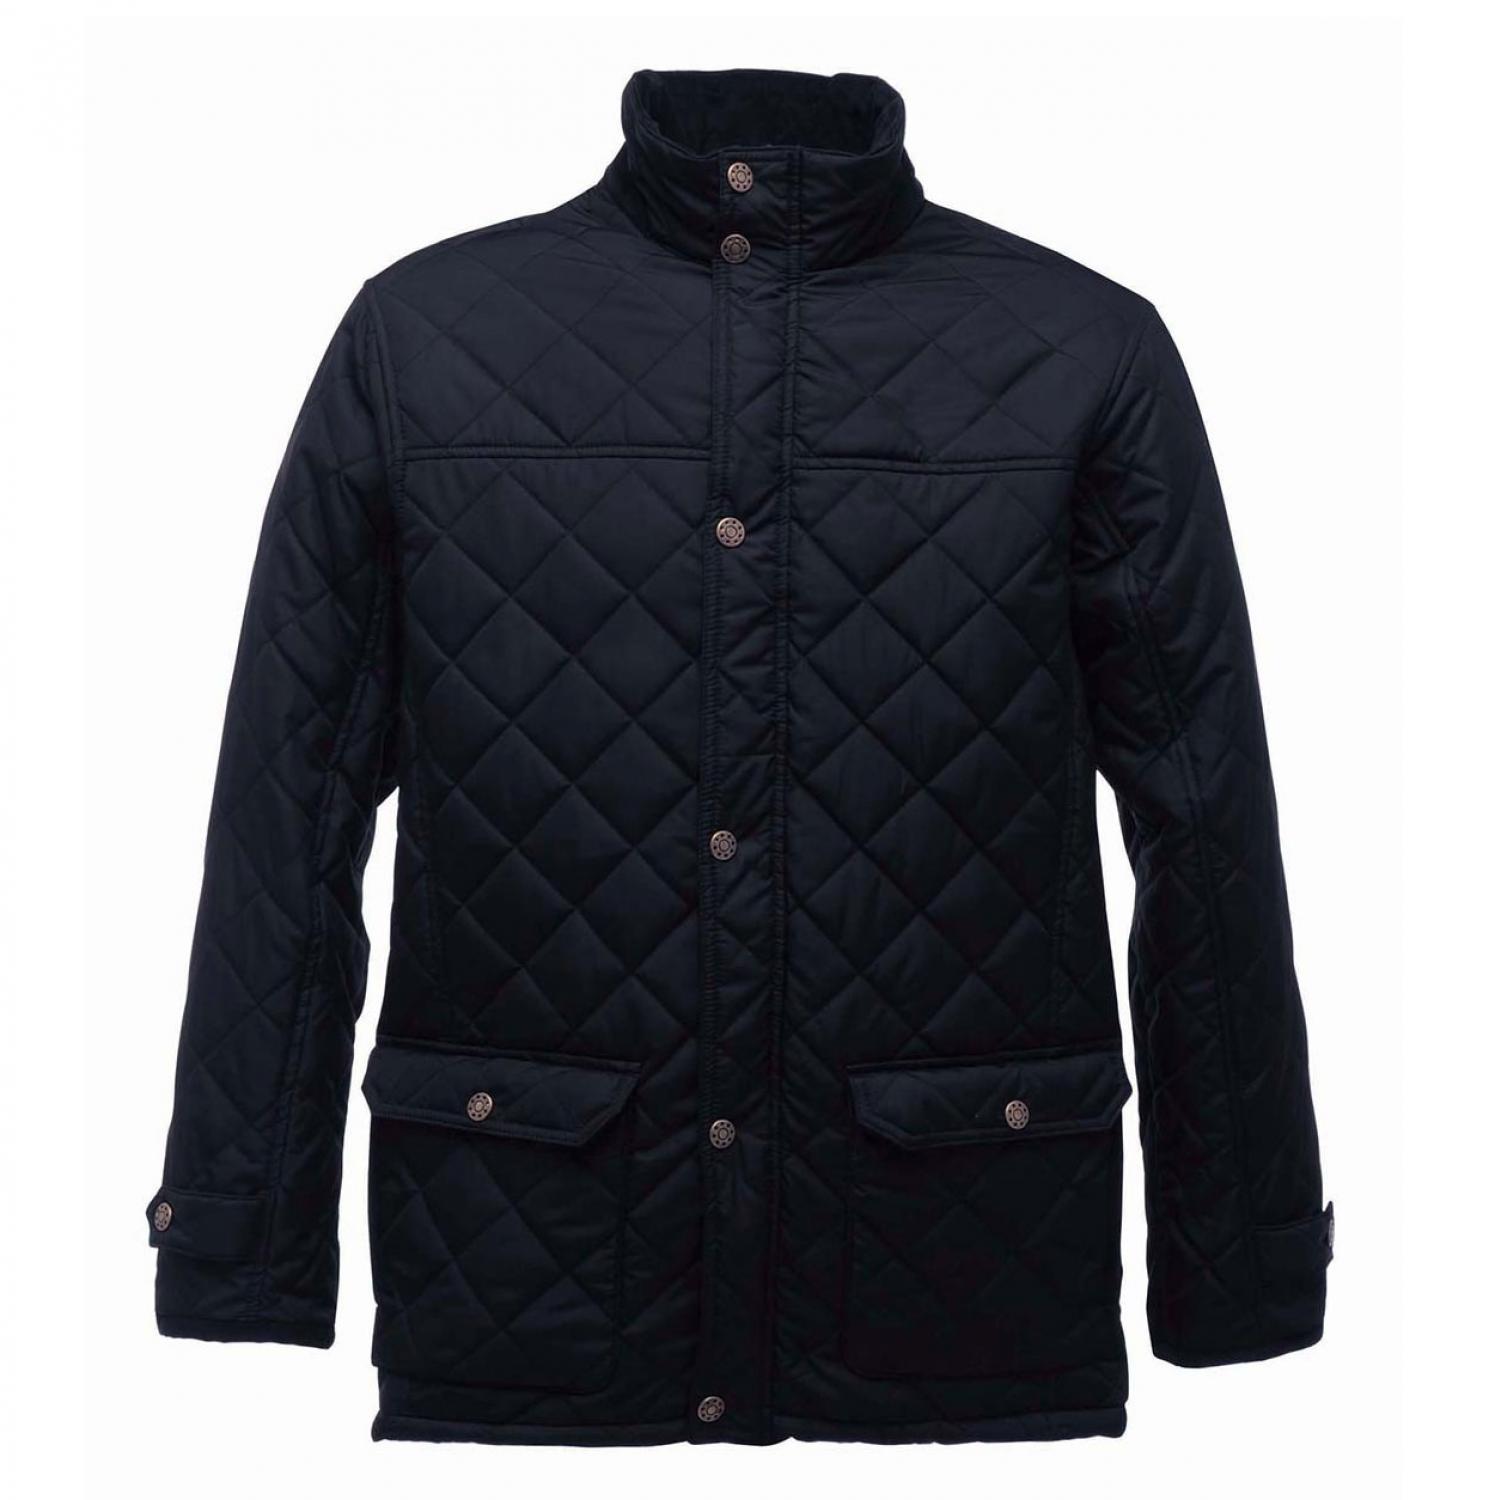 Buy Regatta Tyler Quilted Black Jacket from Fane Valley Stores ...